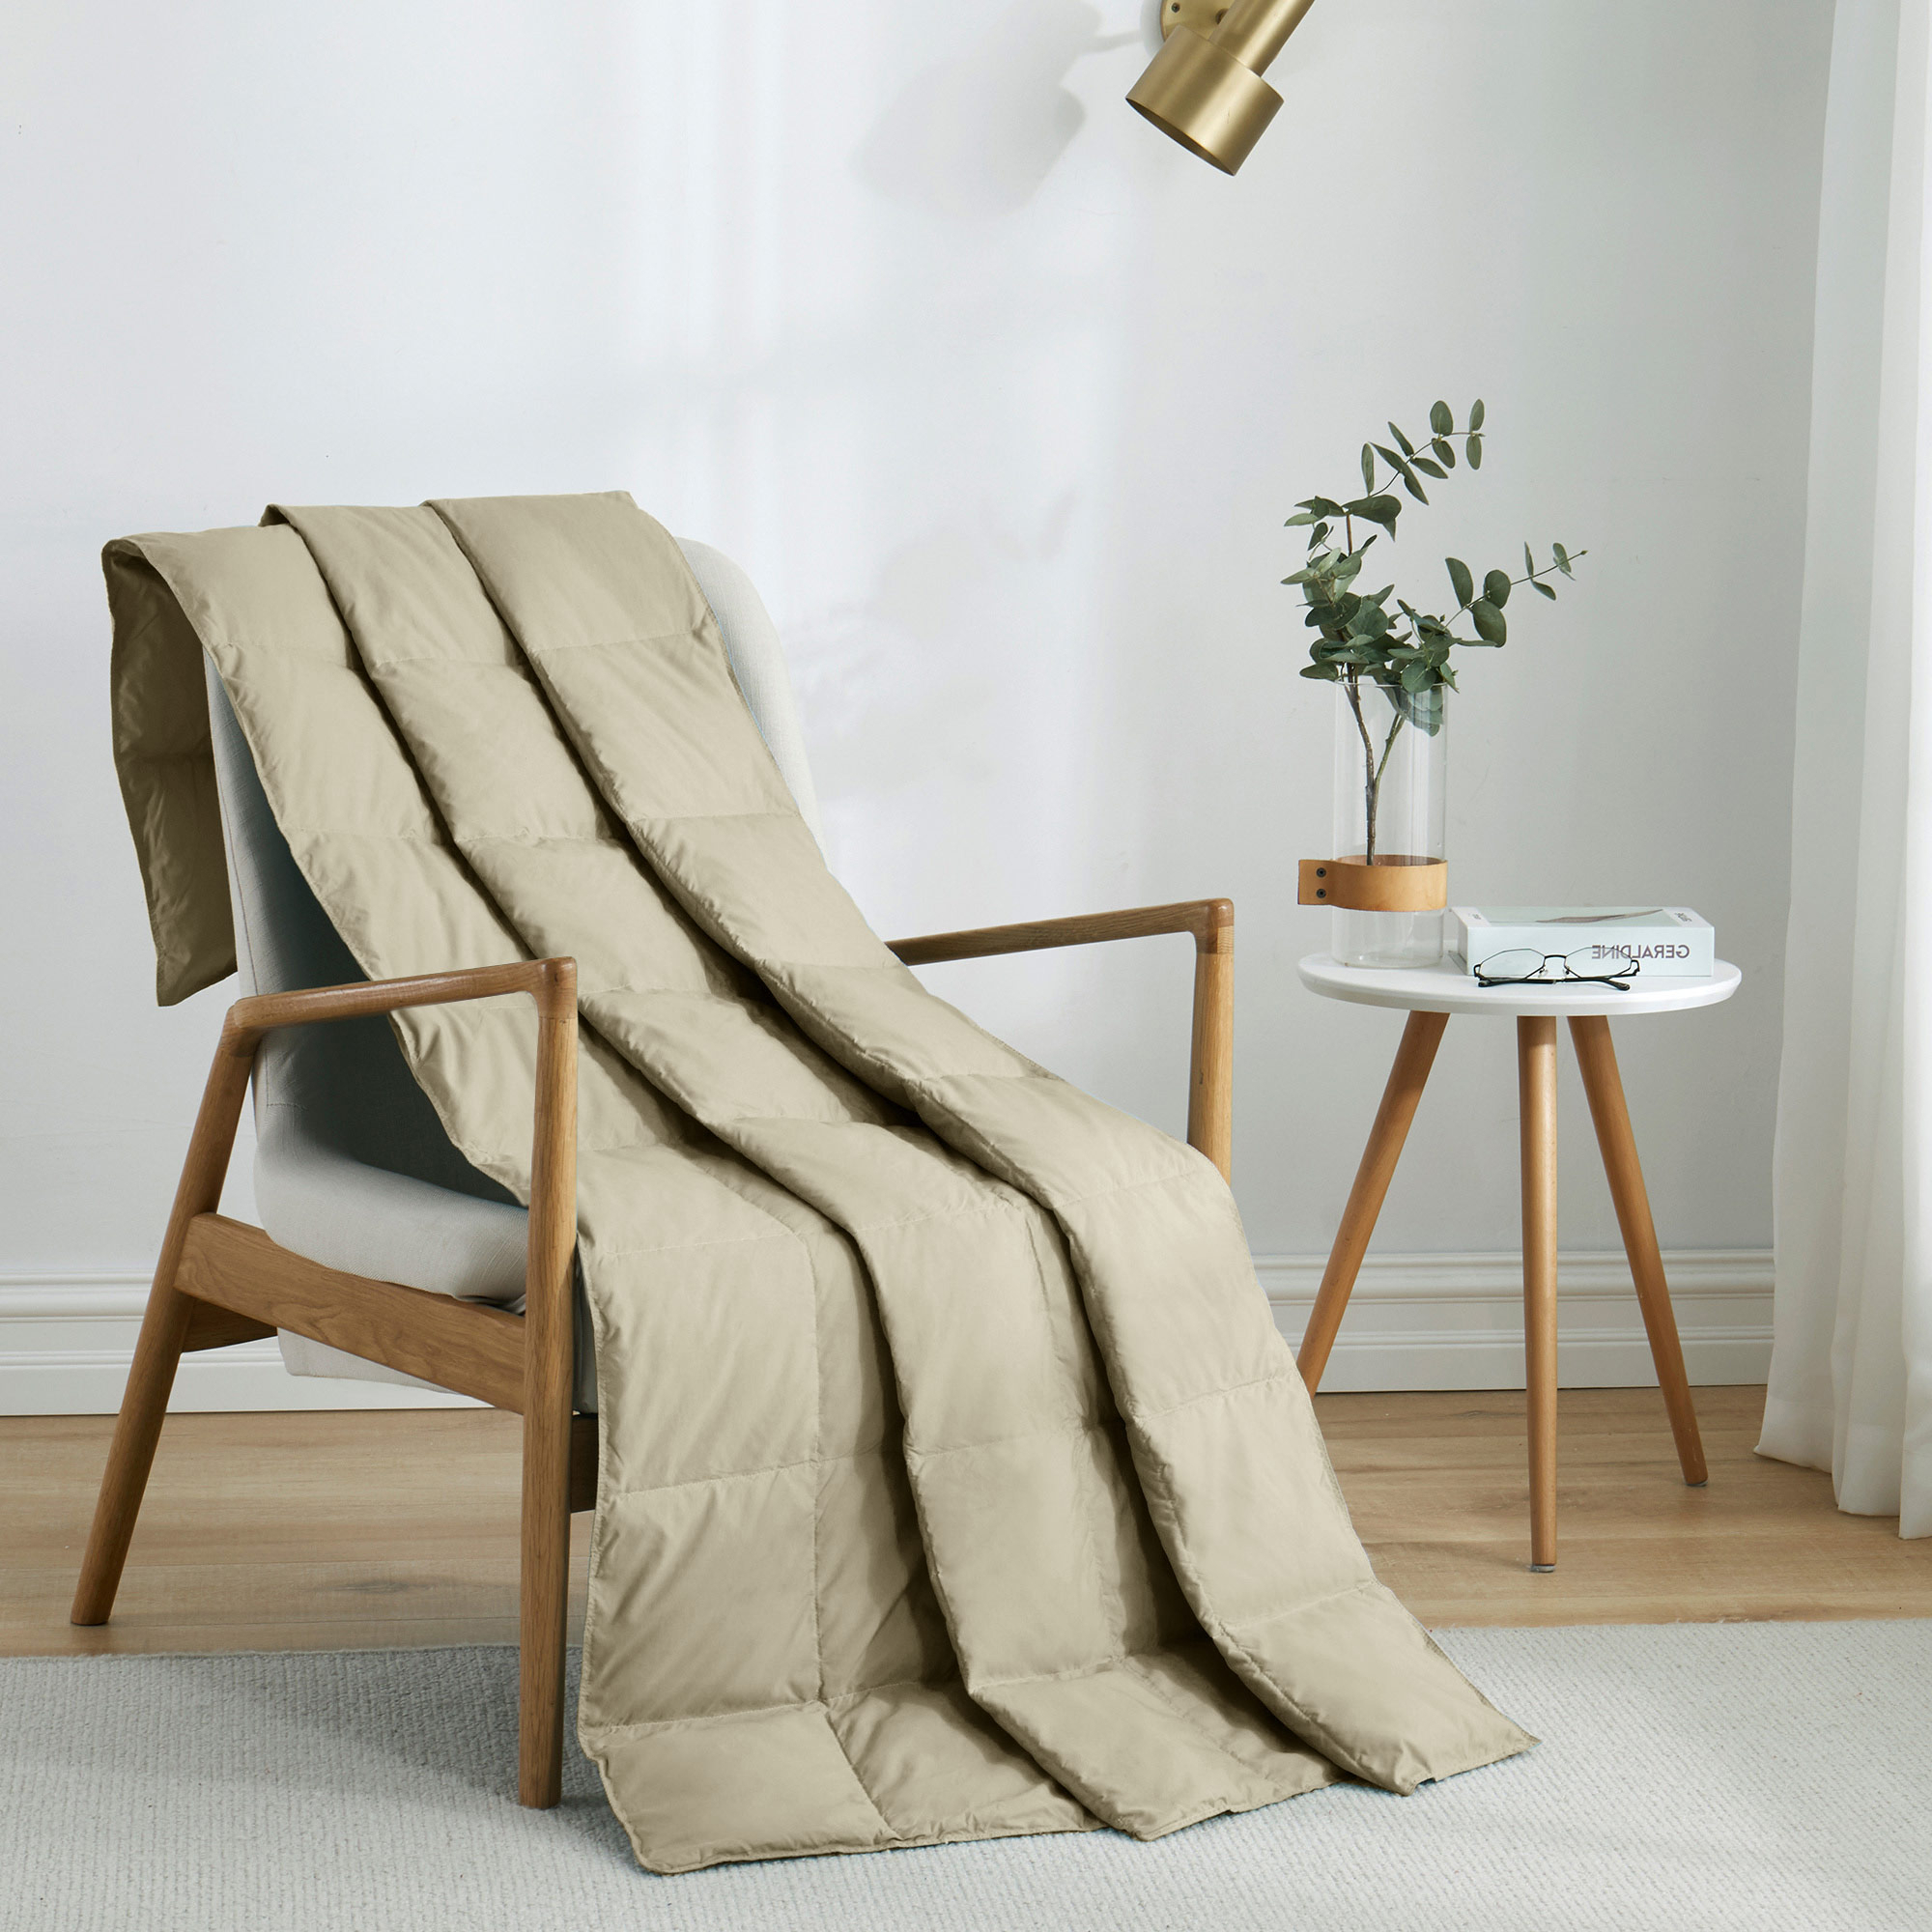 Natural Down Blanket Filled With UltraFeather And Down, Throw Blanket (50 X 70) Sewn Through Box Design - Khaki